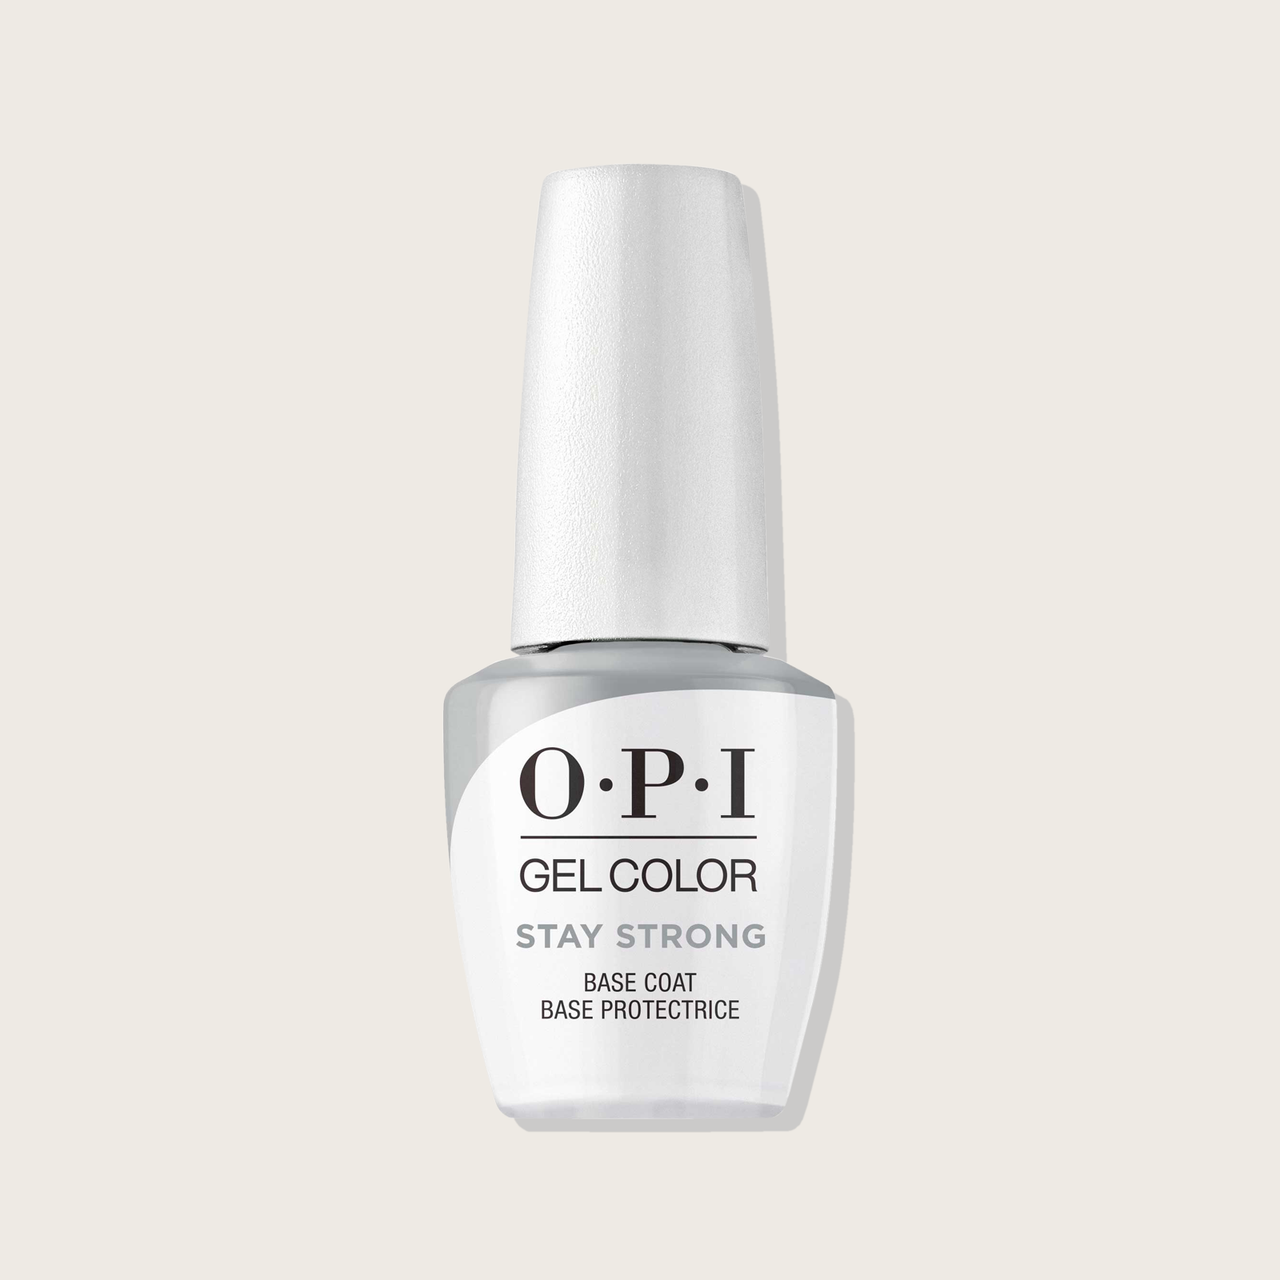 Opi STAY STRONG PROTECTIVE BASE COAT #GC002 